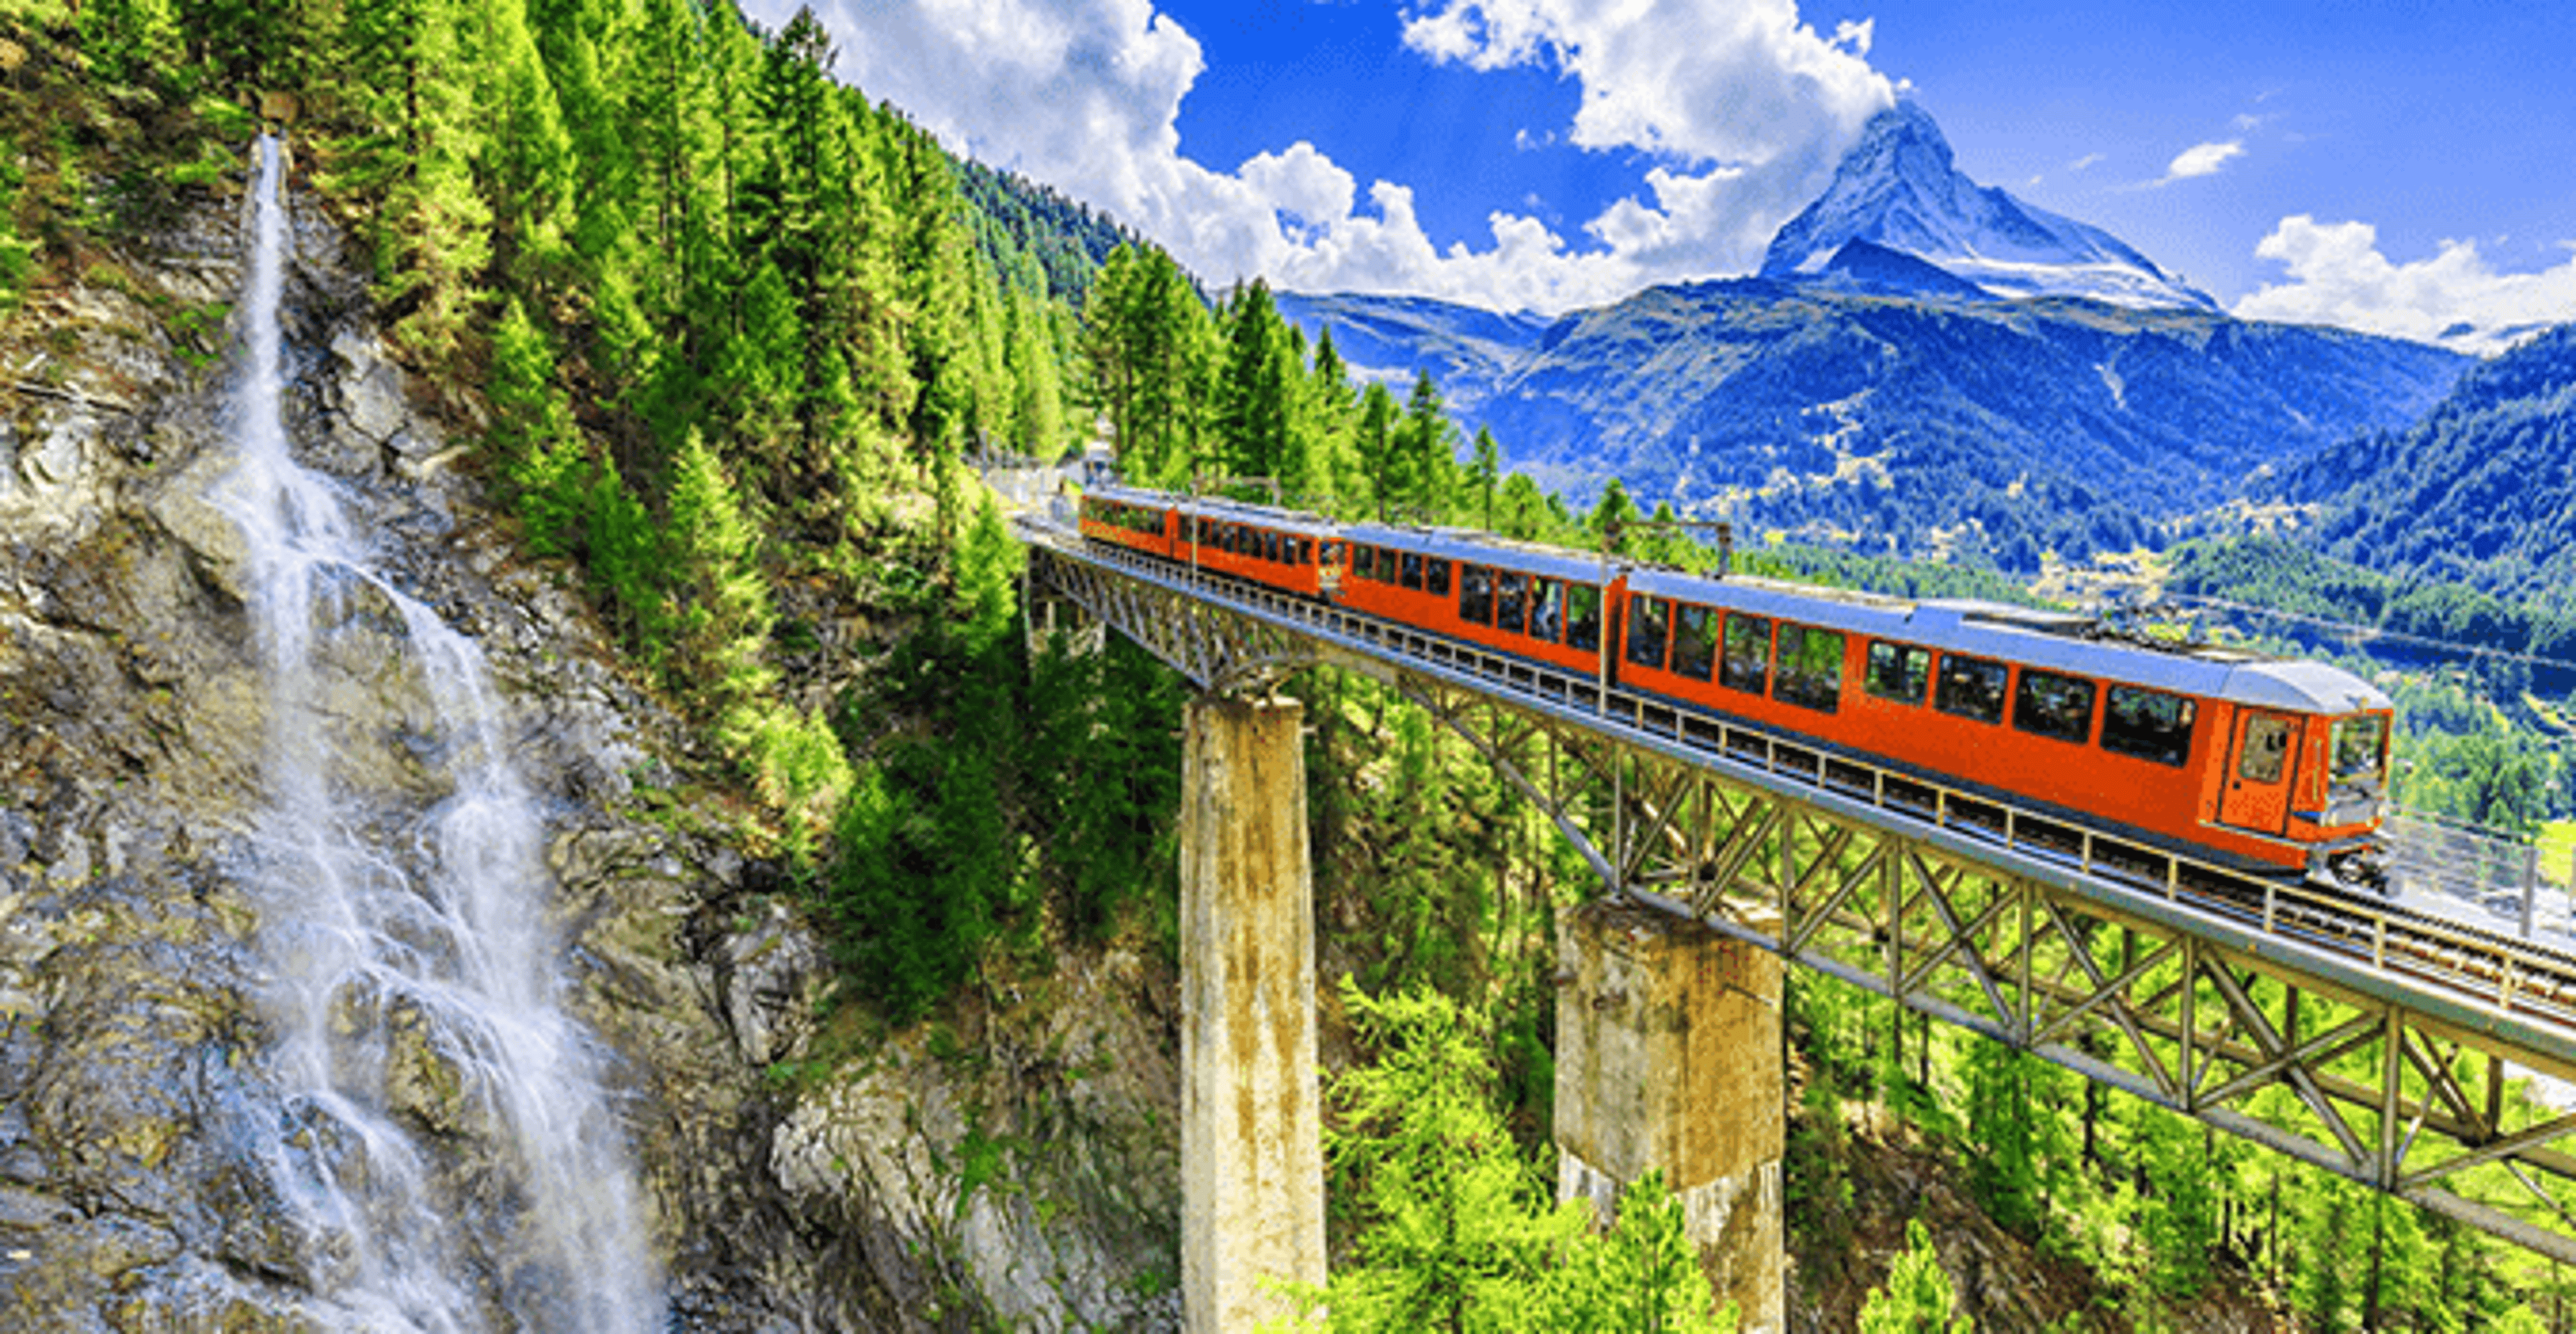 Train travelling across a rail bridge with mountains in the background and a waterfall on the cliffside